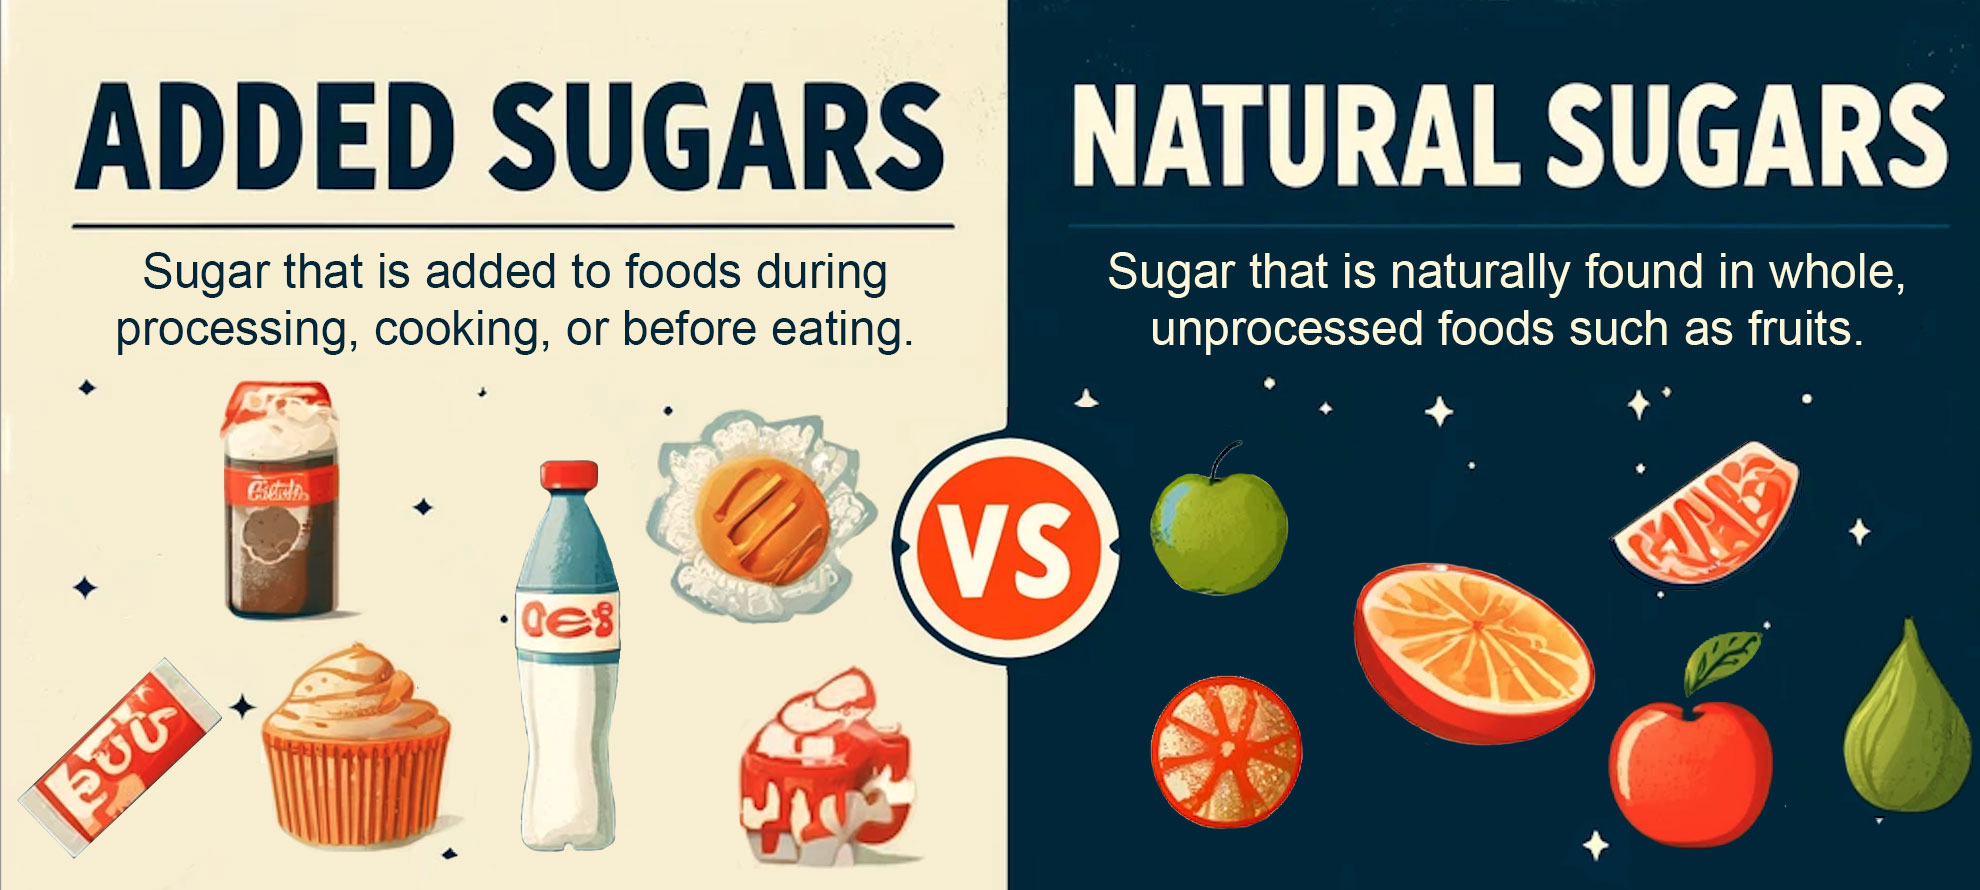 Graphic showing sample foods that contain added sugars versus sample foods that contain natural sugars